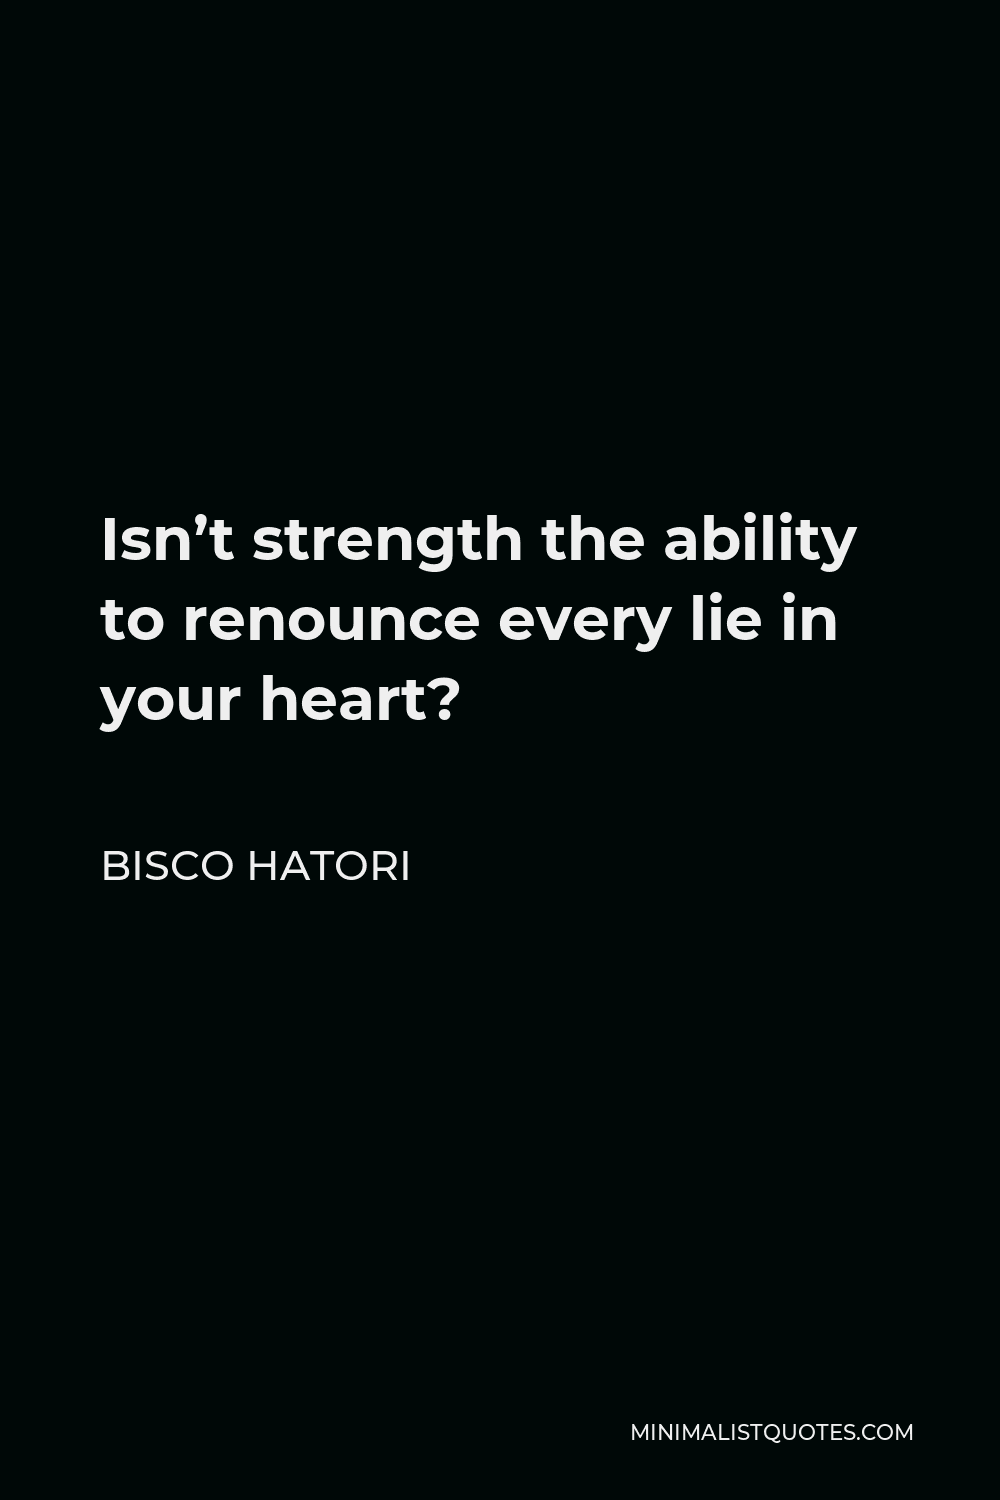 Bisco Hatori Quote - Isn’t strength the ability to renounce every lie in your heart?